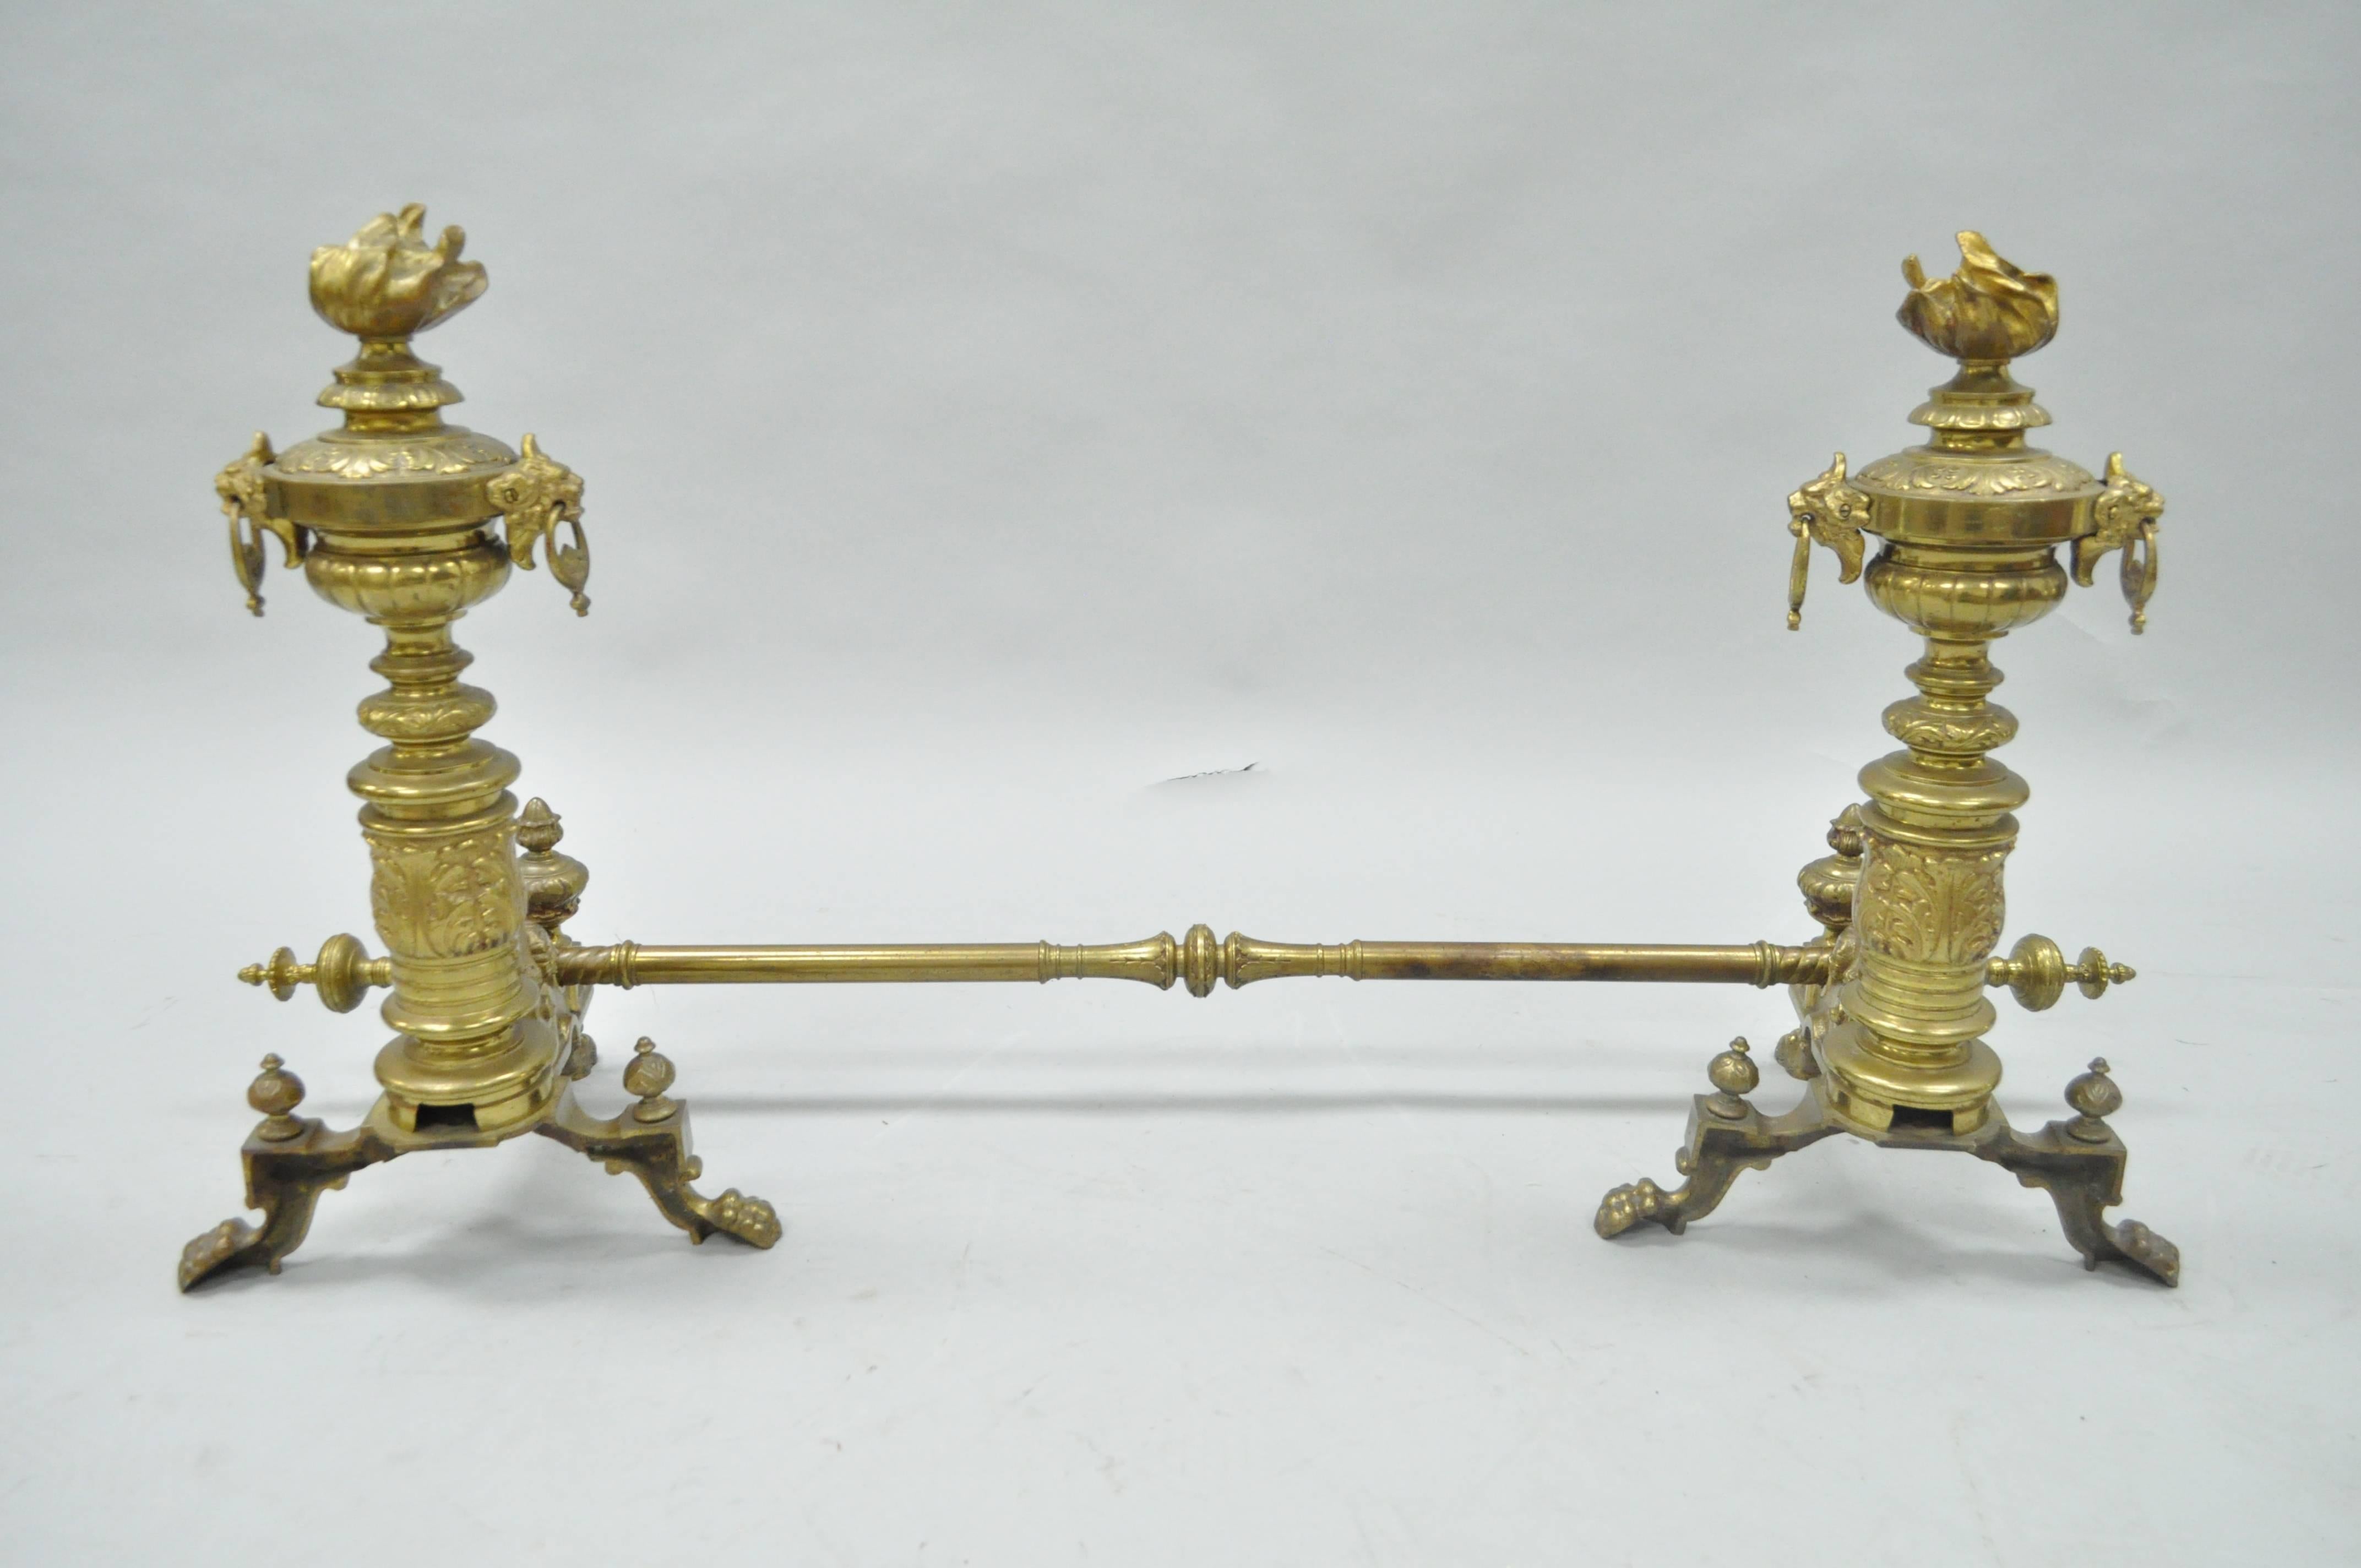 Pair of 19th C. French Empire Neoclassical Flame & Lion Brass Paw Andirons & Bar For Sale 3